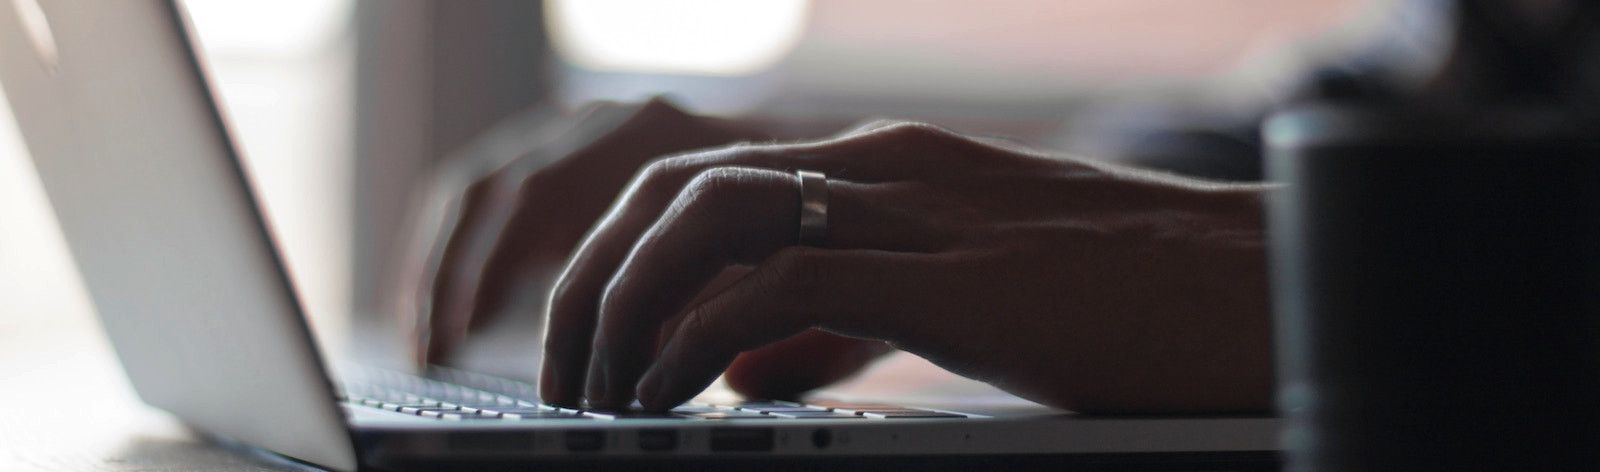 Sideview photo of a man's hands poised to type on the keyboard of a laptop. The laptop is silver and the man wears a wedding band on his left ring finger.